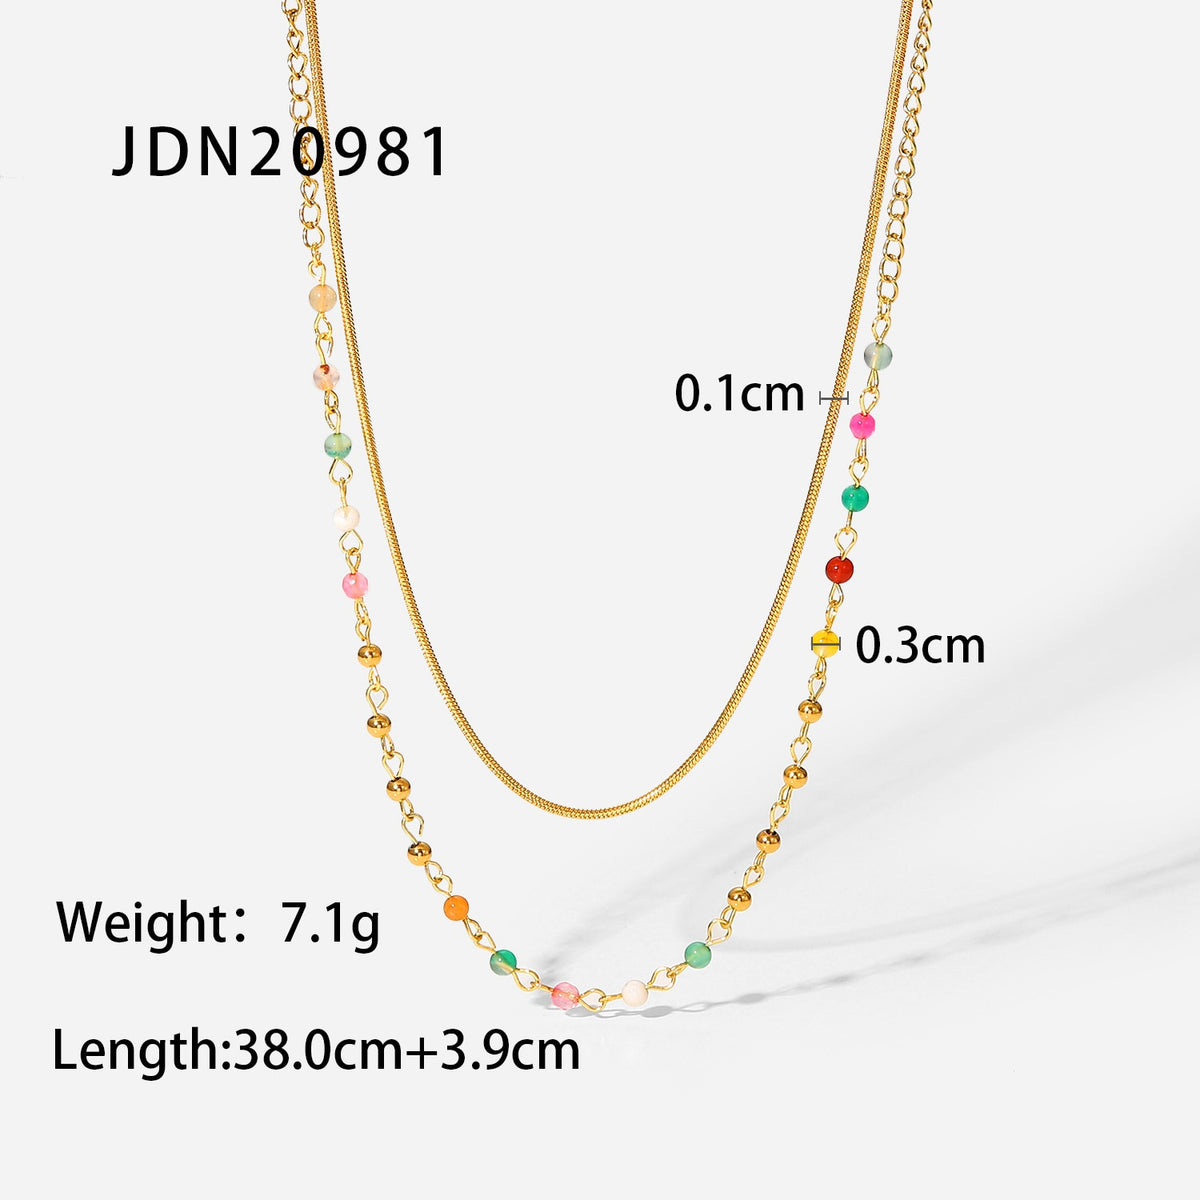 Colorful Stone Beads 18K Gold Stainless Steel Beads Rope Chain Double Necklace For Women Jewelry Hot